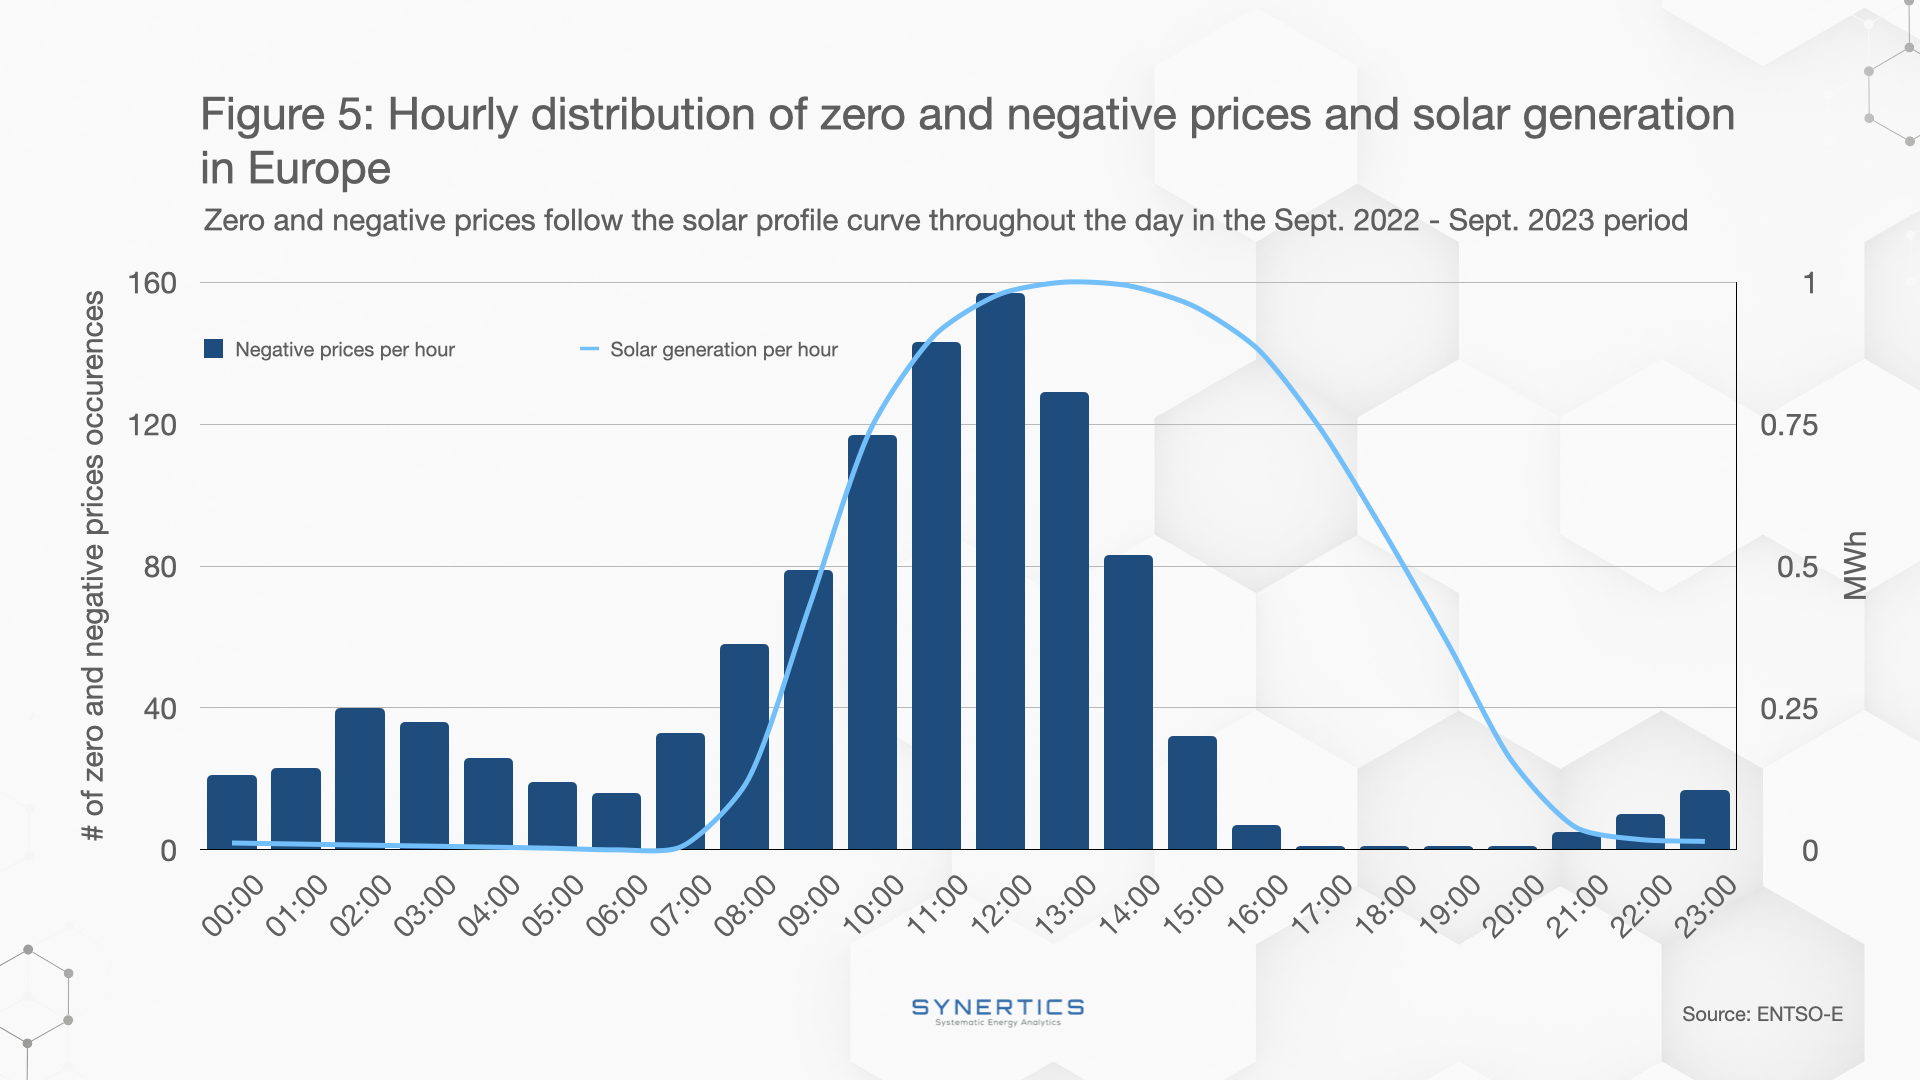 Hourly distribution of zero and negative prices in Europe